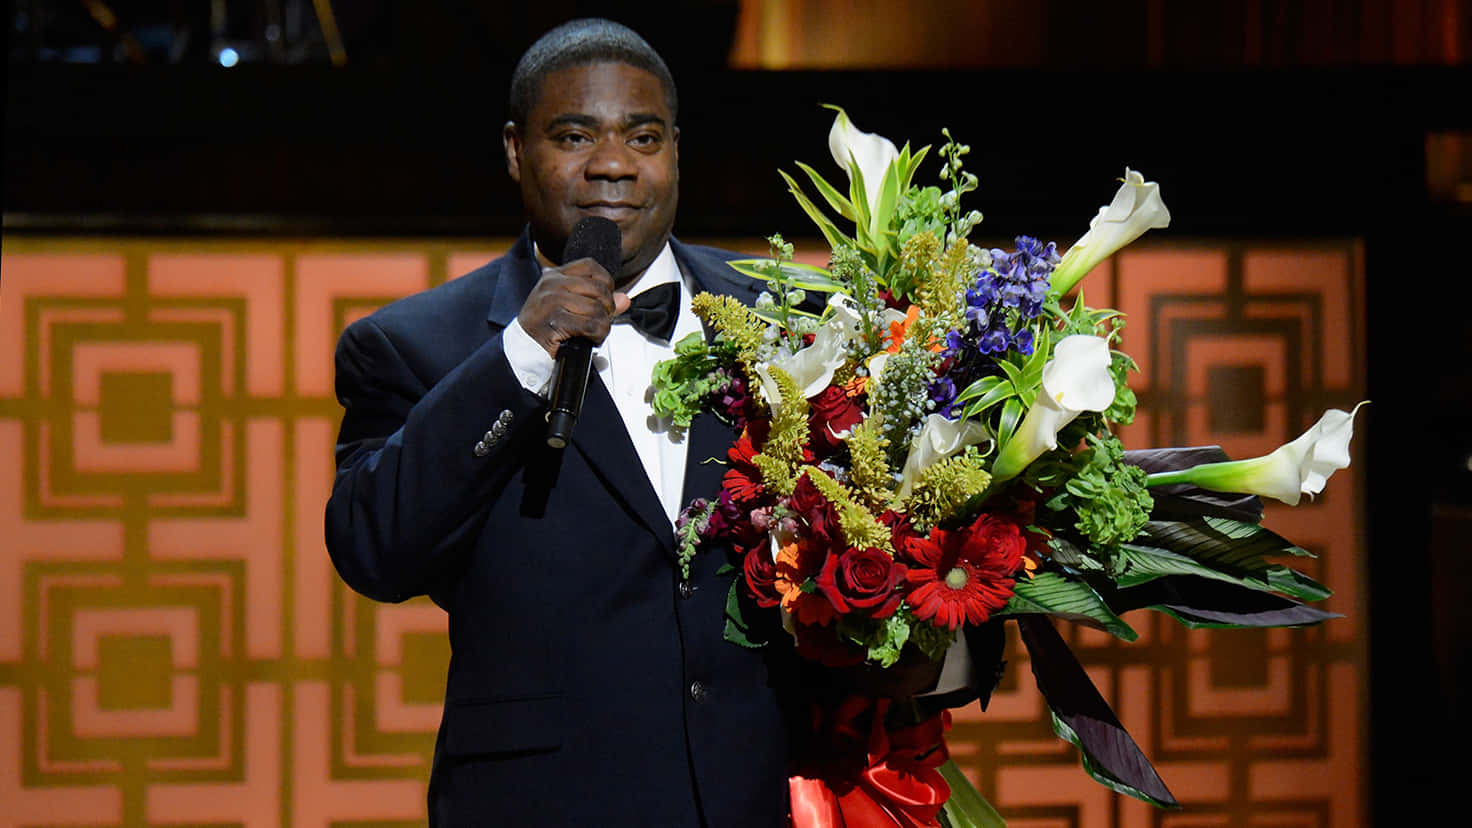 Tracy Morgan Smiling during an event Wallpaper